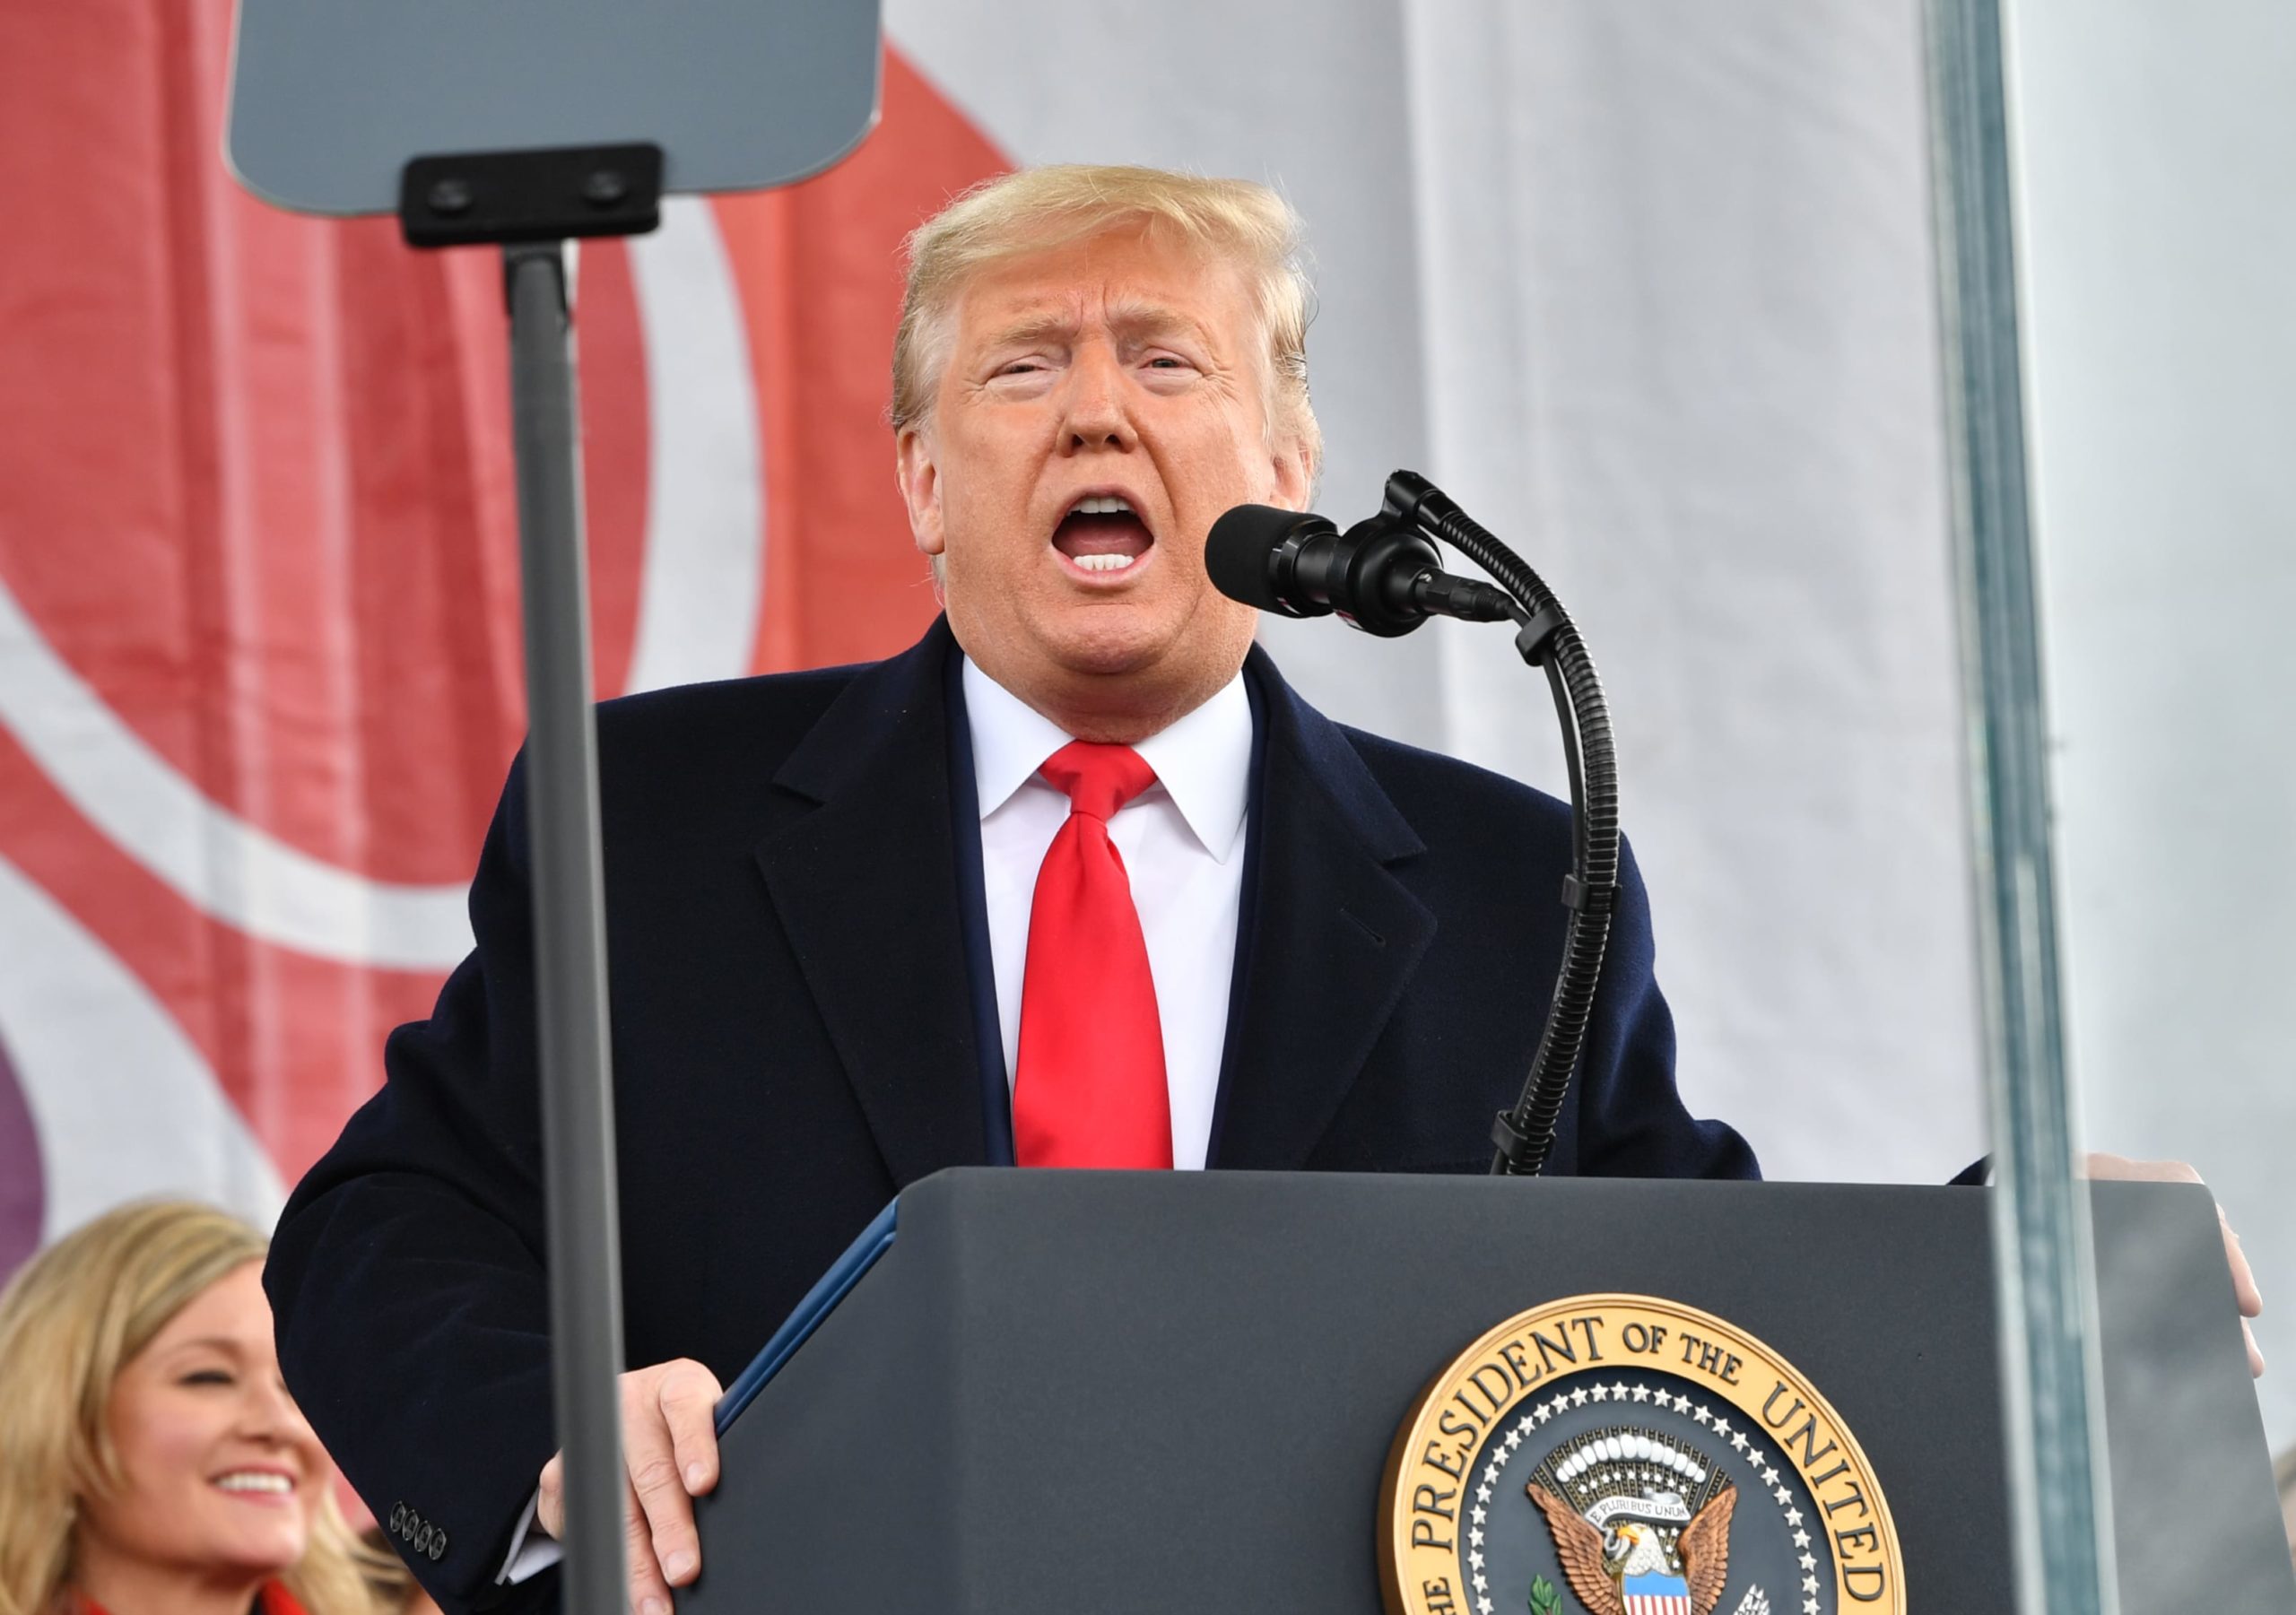 Trump delivers remarks at anti-abortion March for Life rally